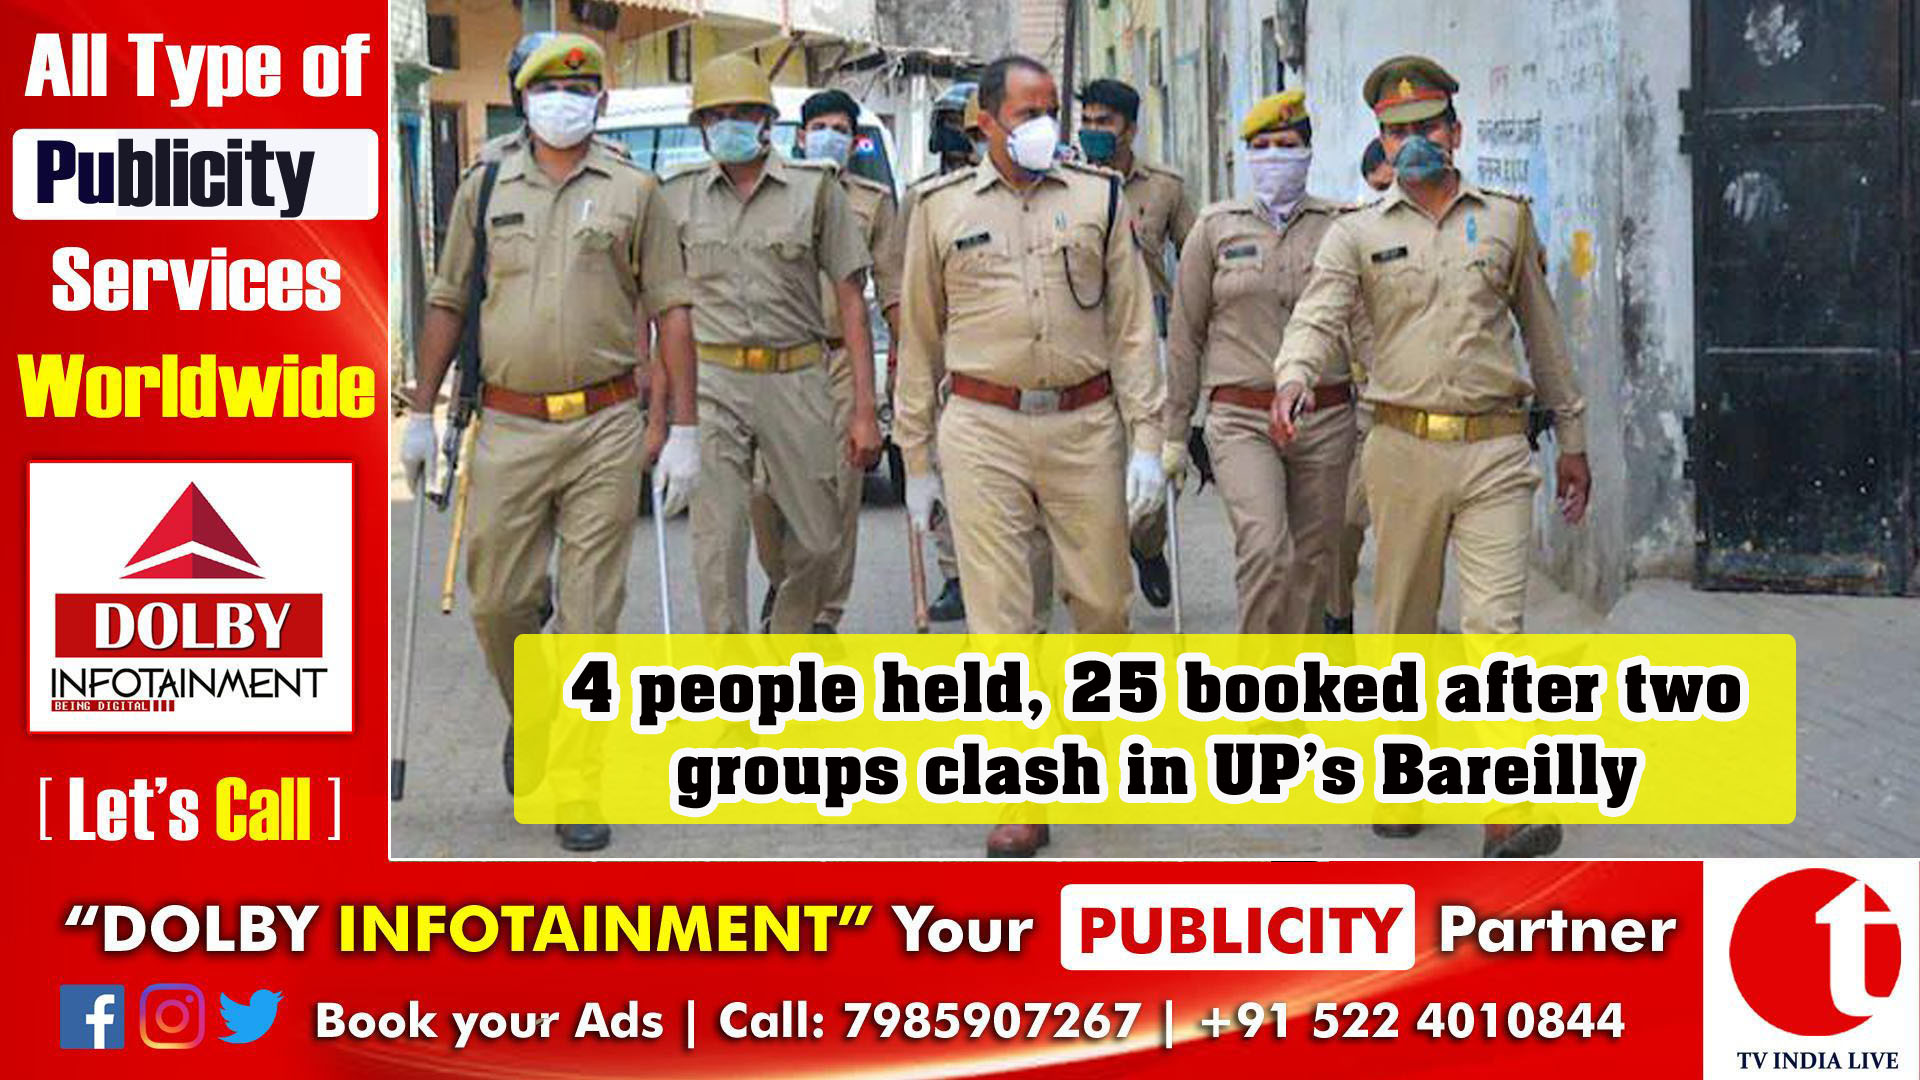 4 people held, 25 booked after two groups clash in UP’s Bareilly